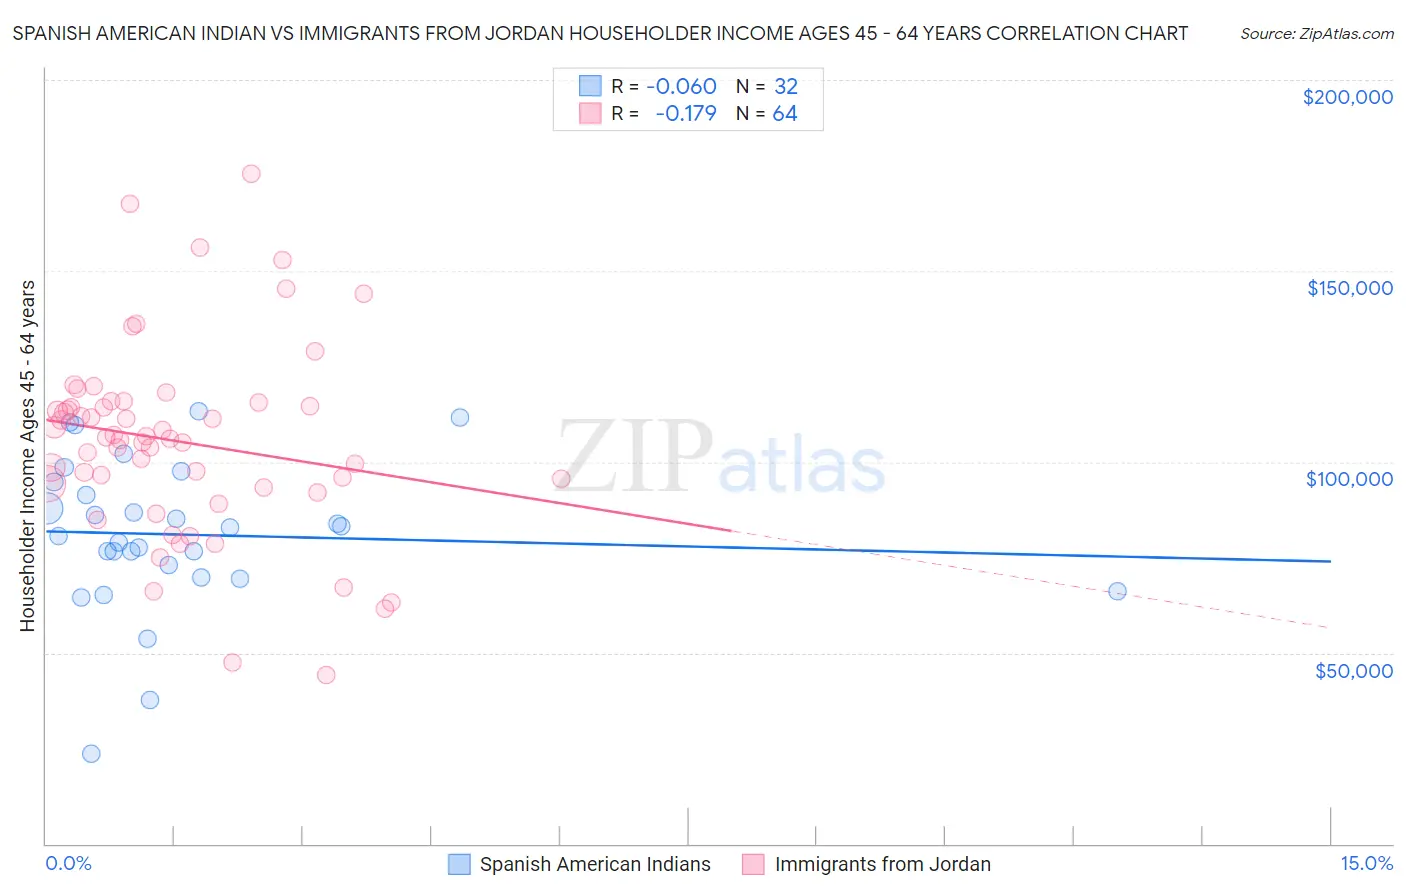 Spanish American Indian vs Immigrants from Jordan Householder Income Ages 45 - 64 years